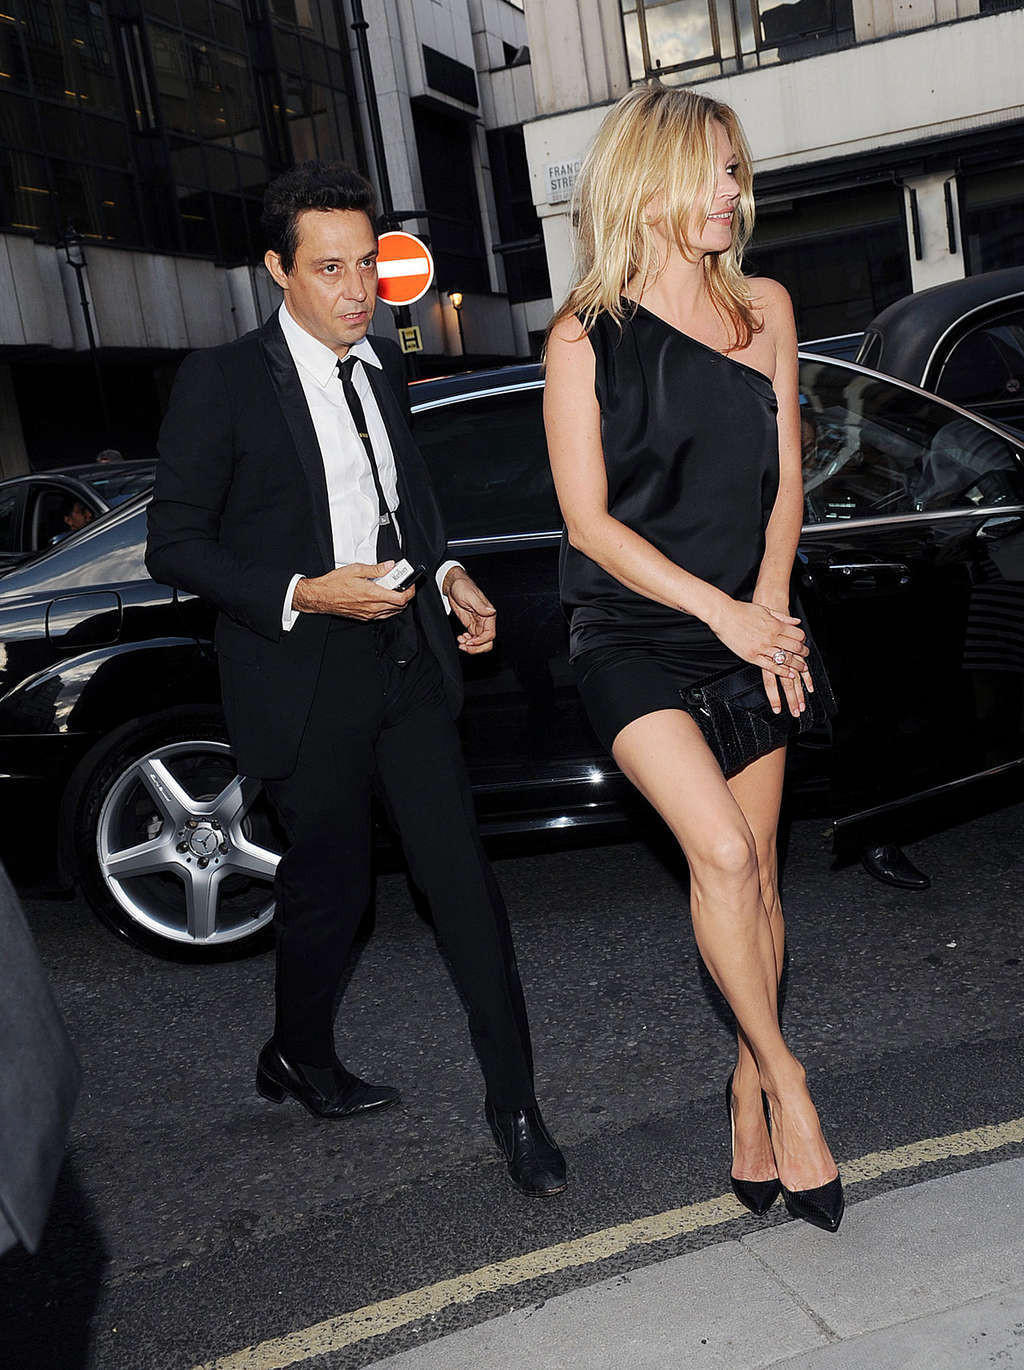 Kate Moss upskirt in car and very leggy in mini skirt and topless #75339894